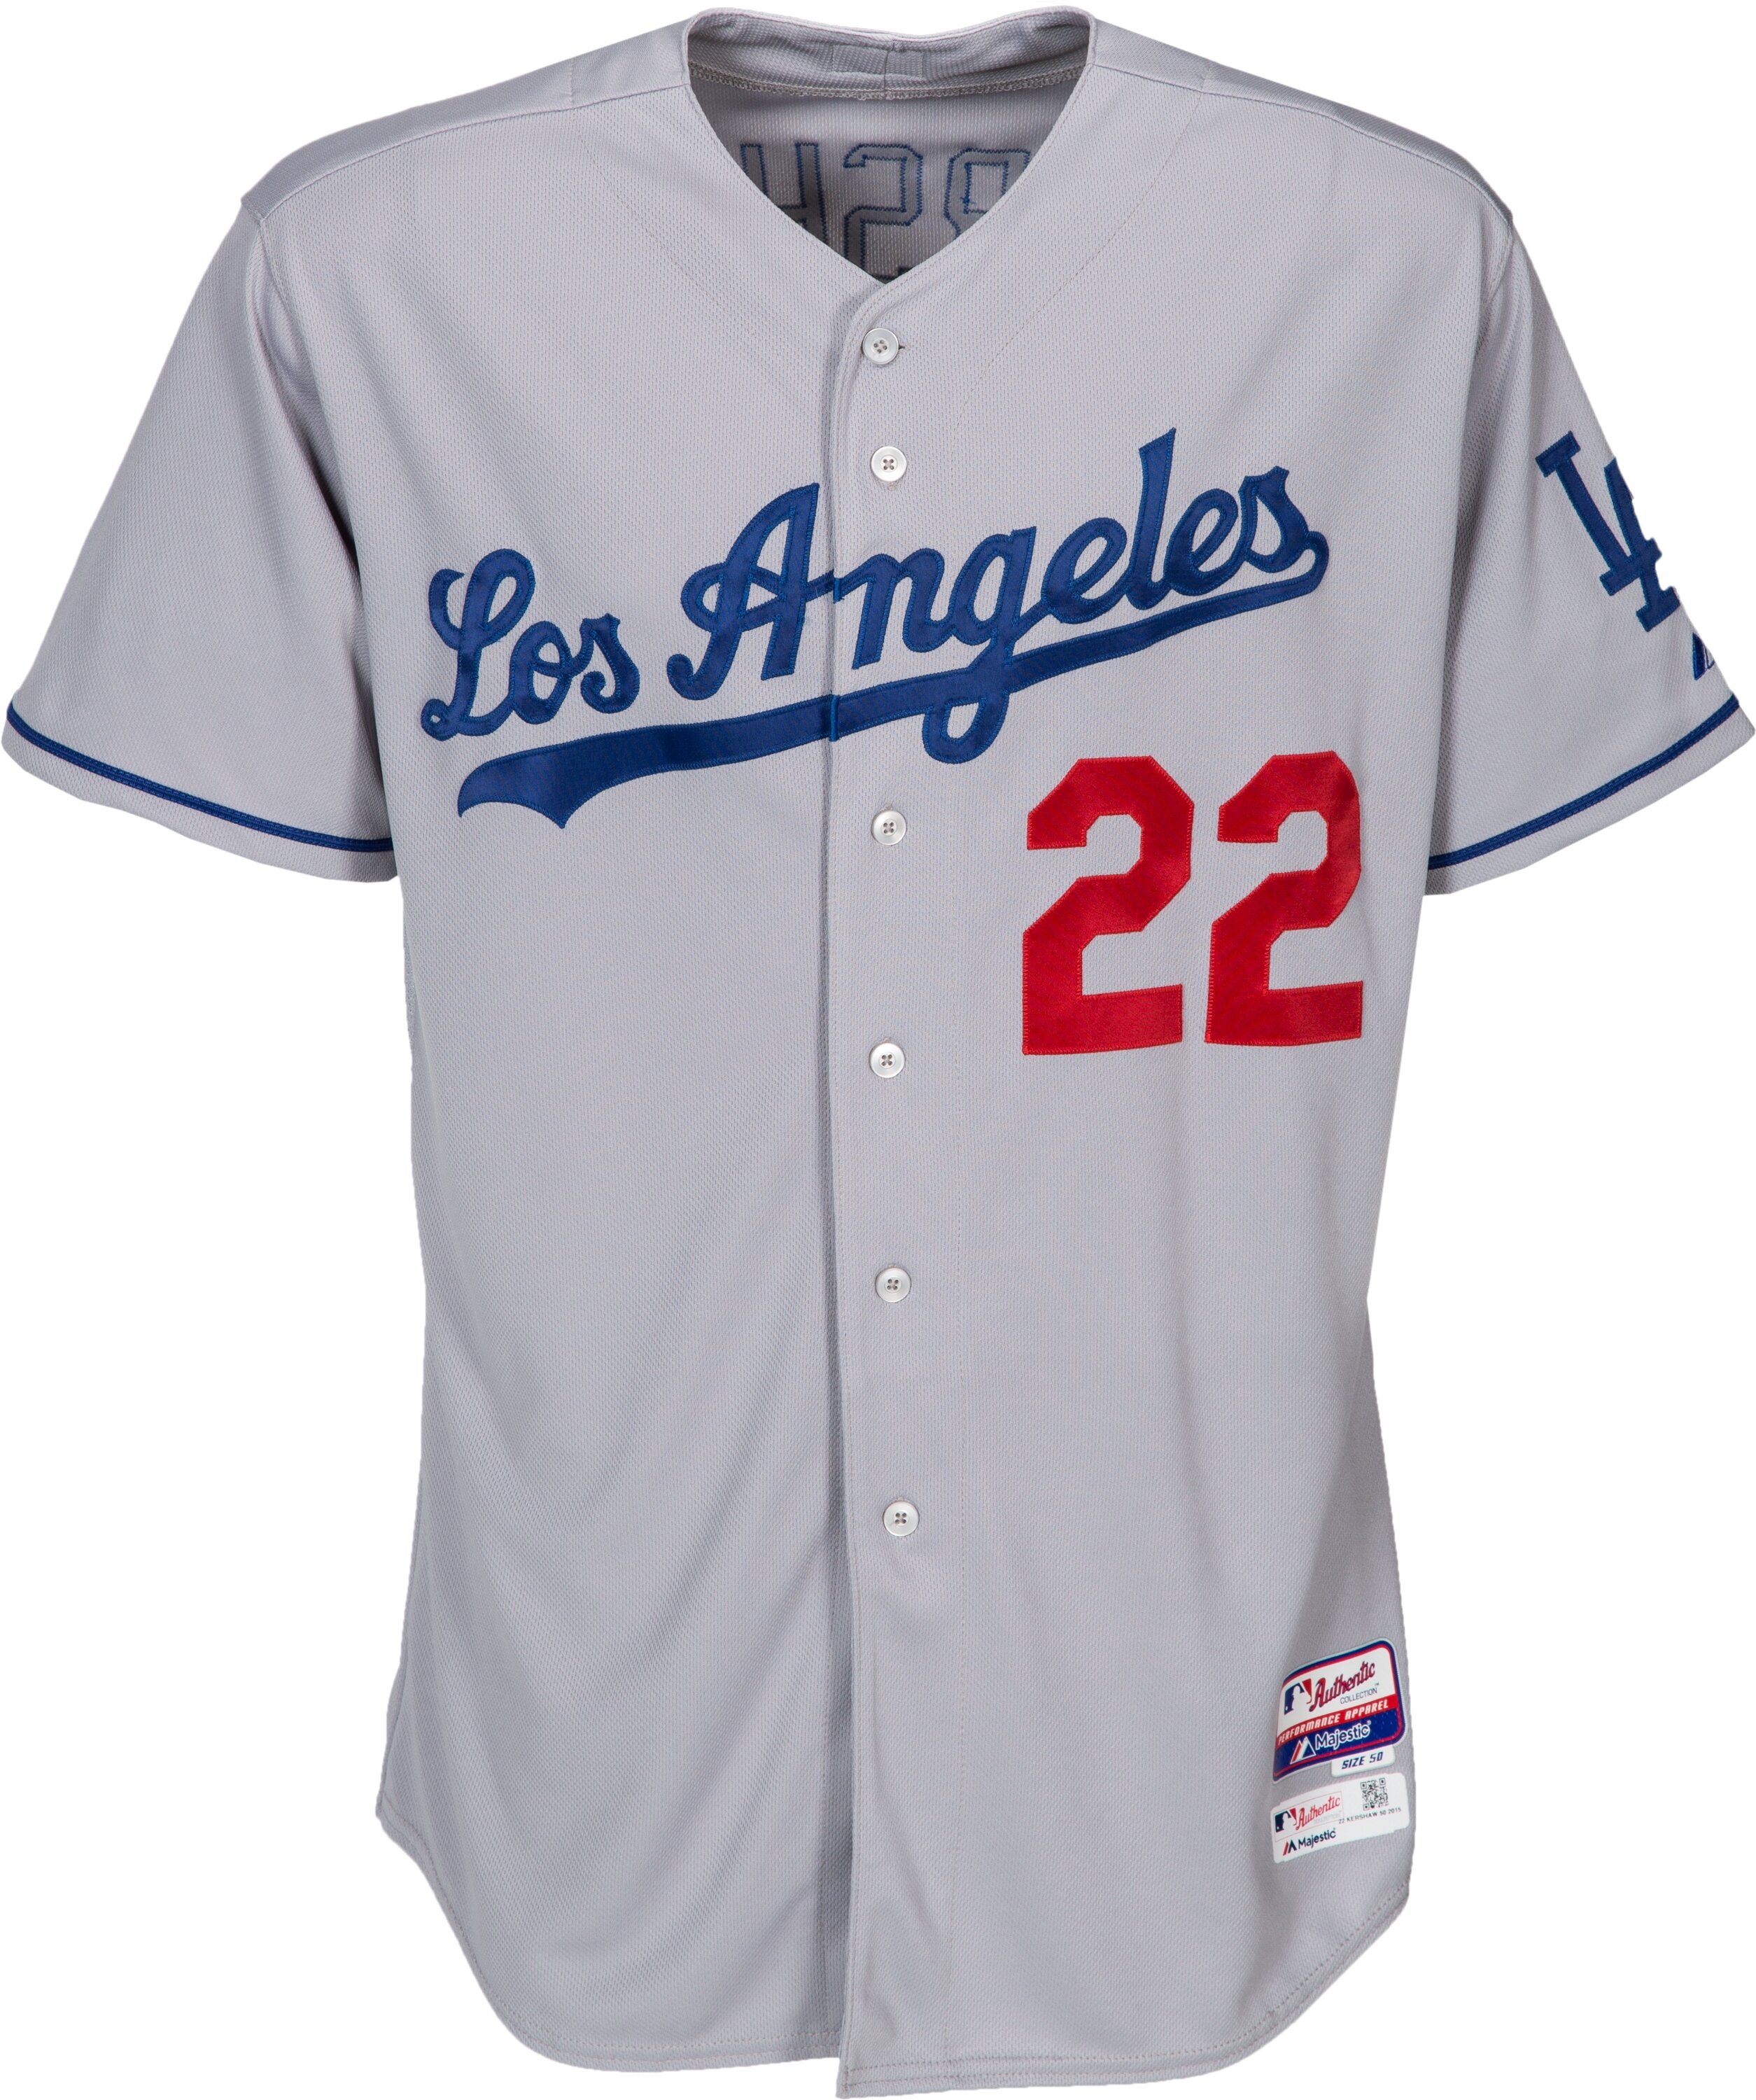 Clayton Kershaw Signed Dodgers Authentic Majestic Jersey (MLB